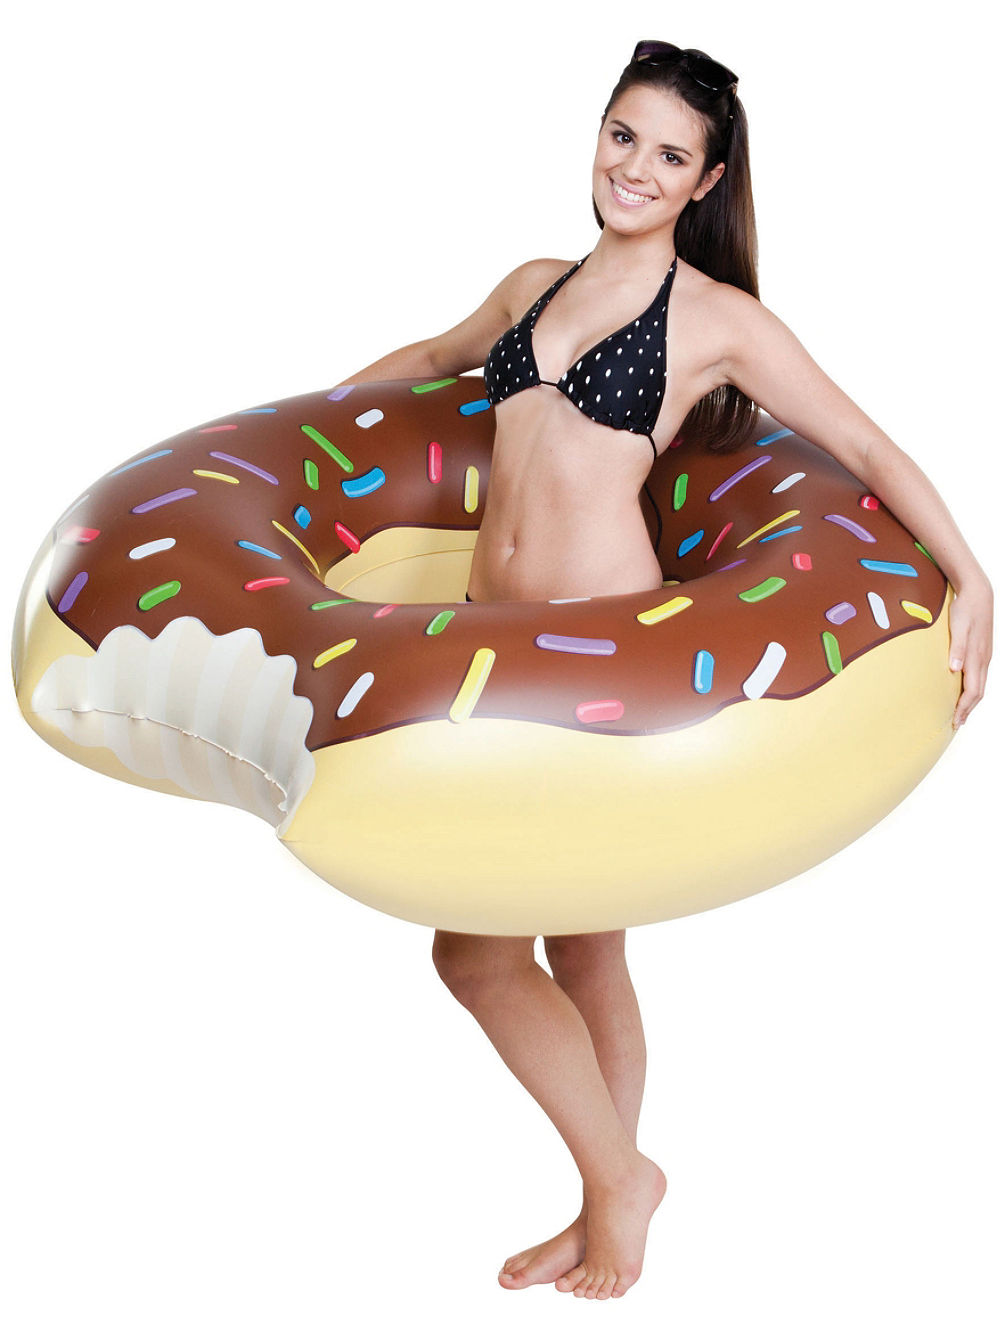 Pool Float Giant Chocolate Donut